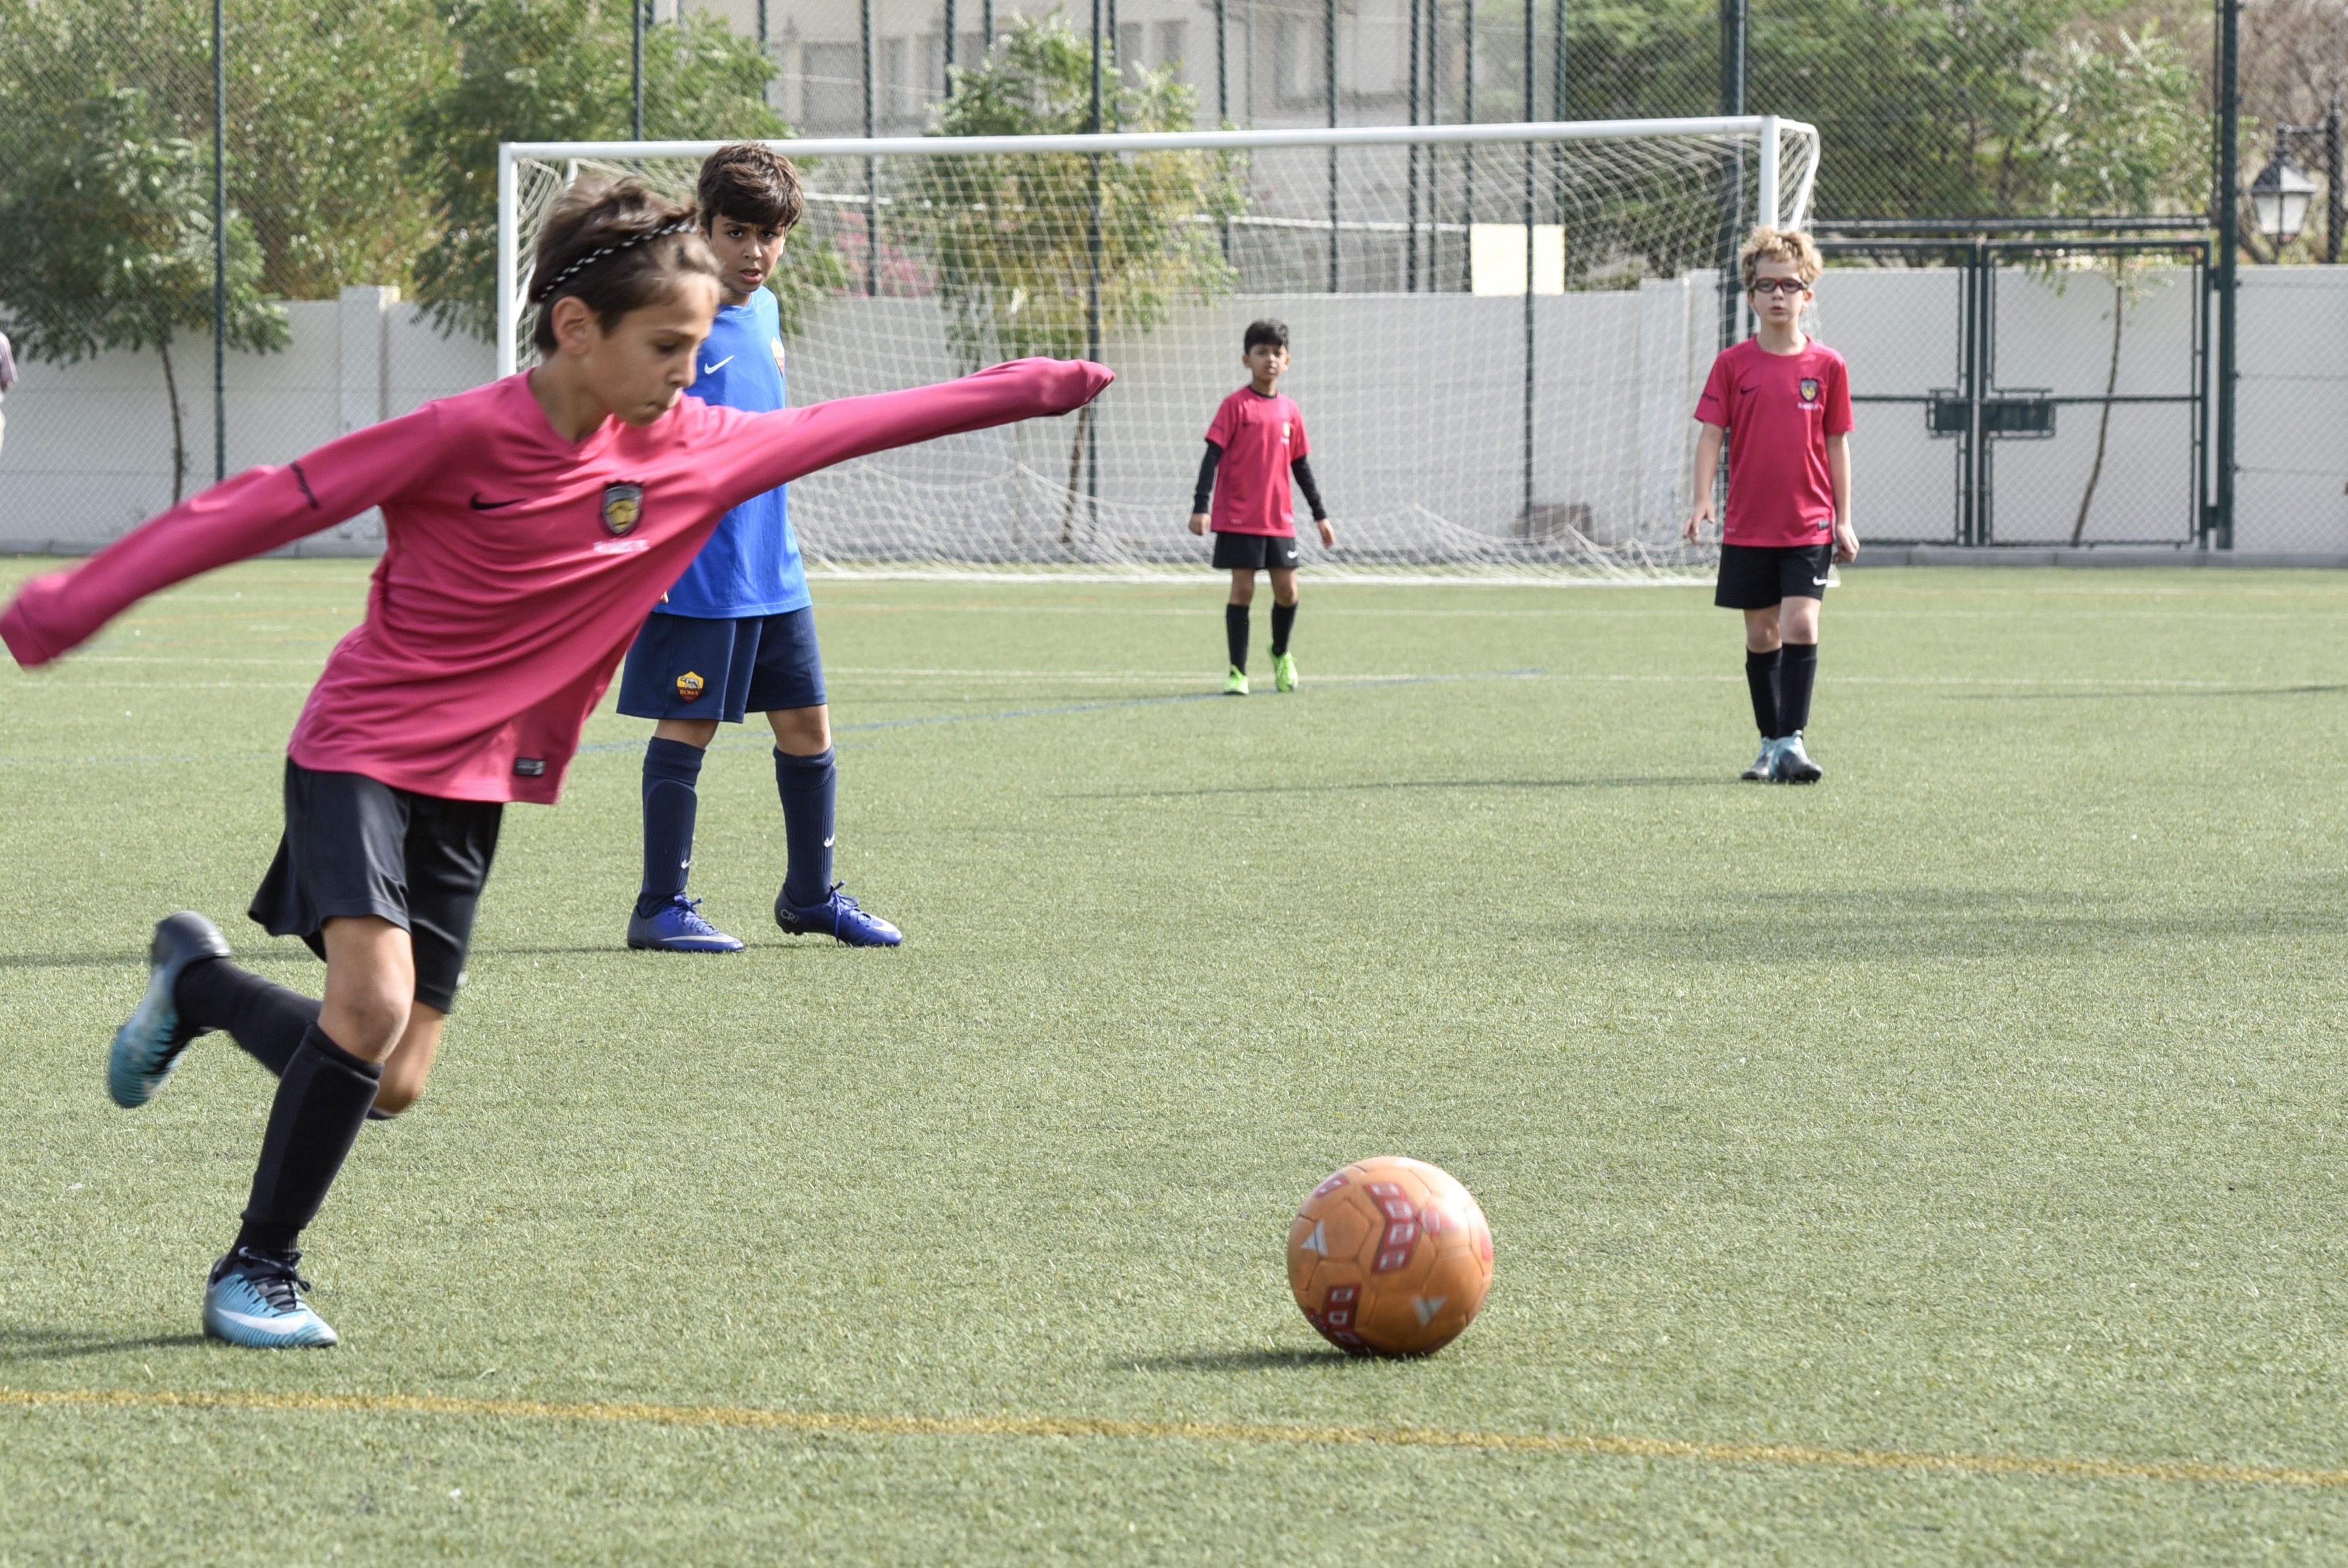 Five life lessons for children through football | Alliance Football Club